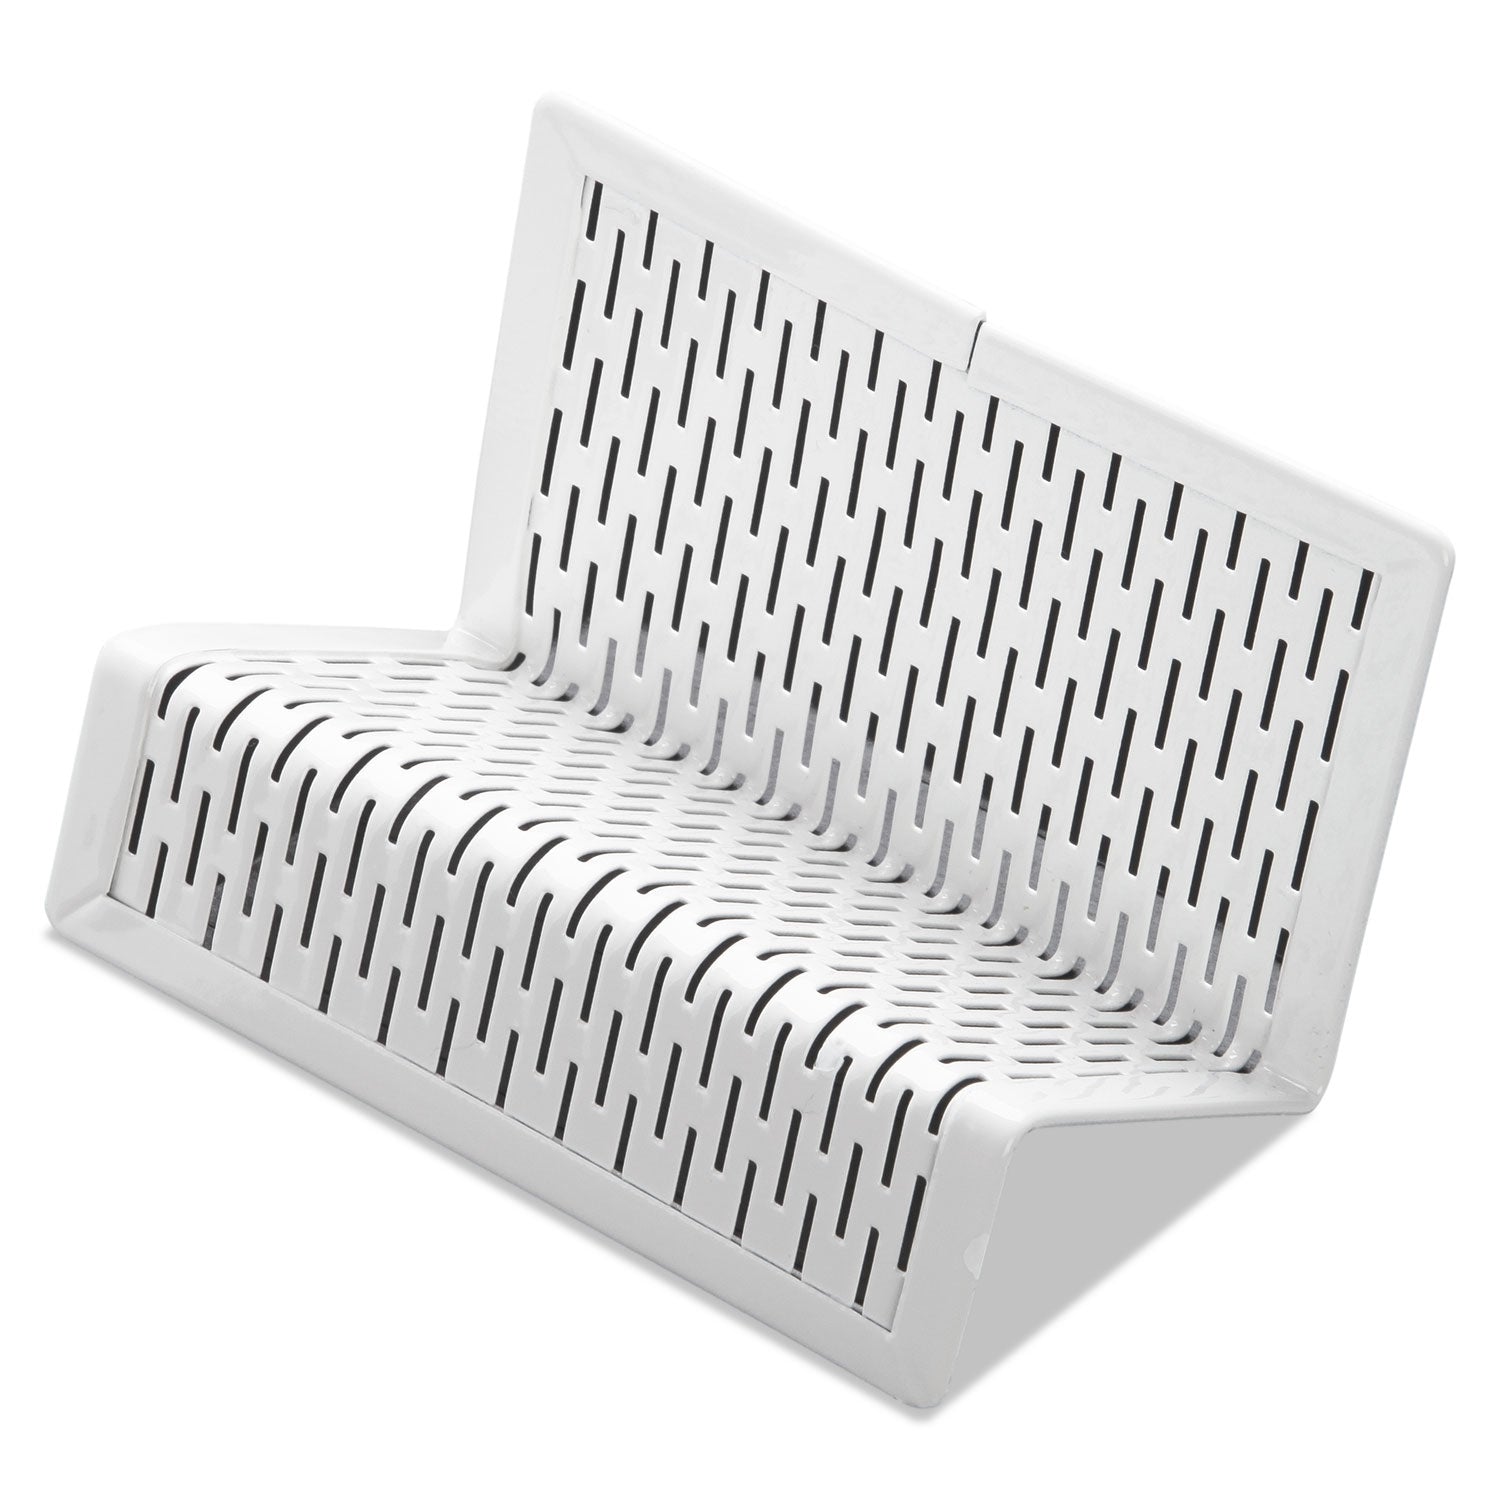 urban-collection-punched-metal-business-card-holder-holds-50-2-x-35-cards-perforated-steel-white_aopart20001wh - 1